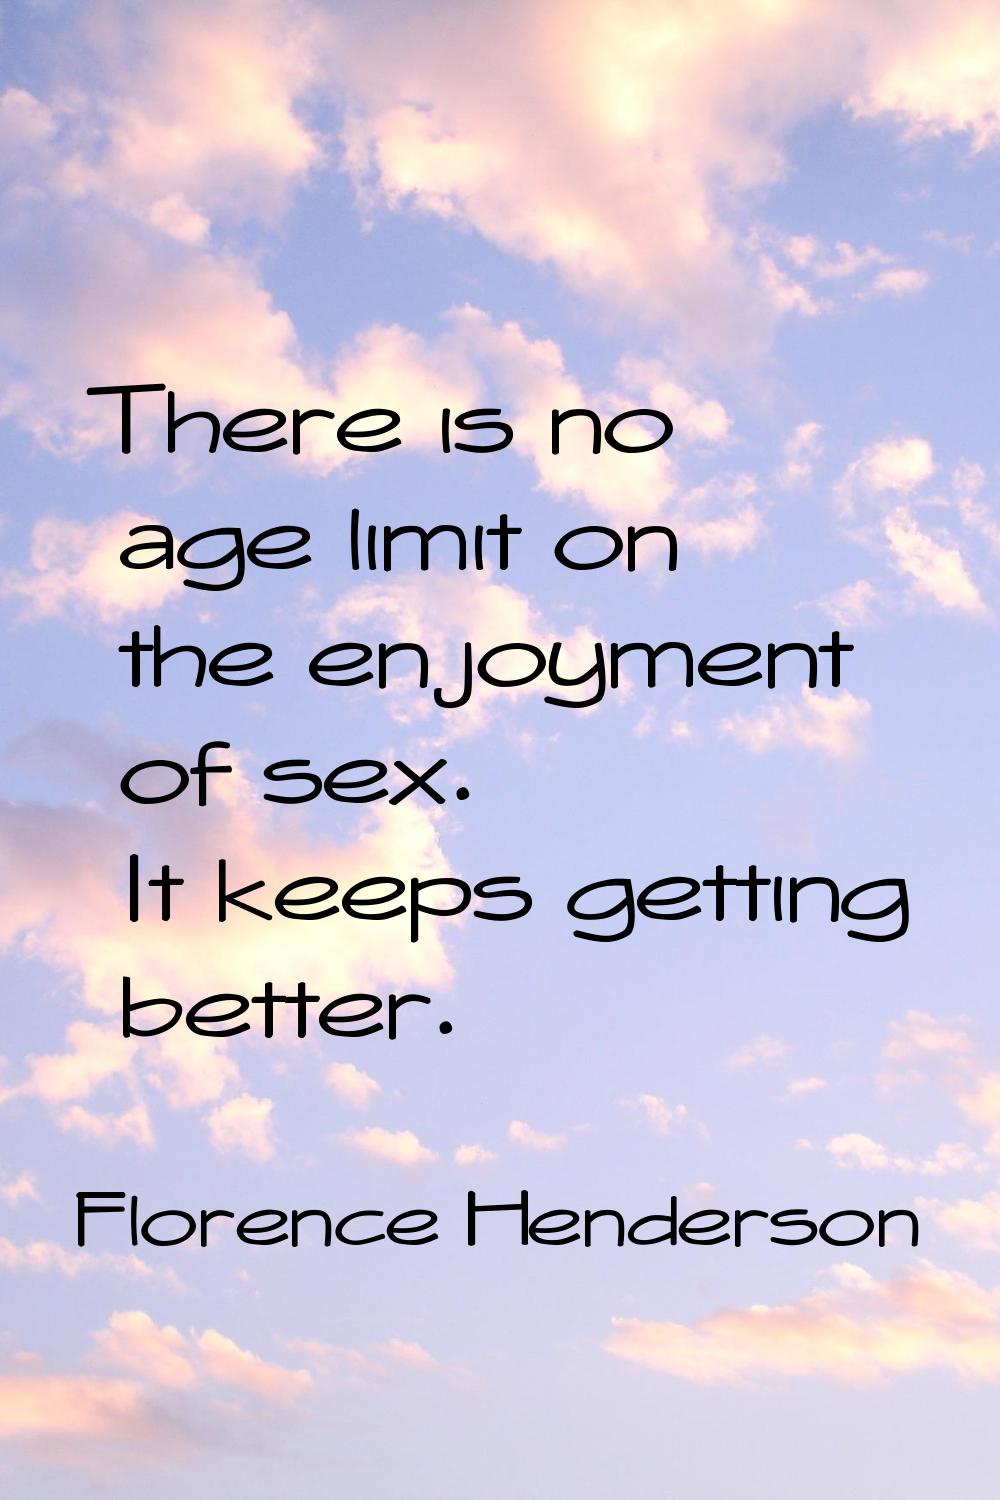 There is no age limit on the enjoyment of sex. It keeps getting better.